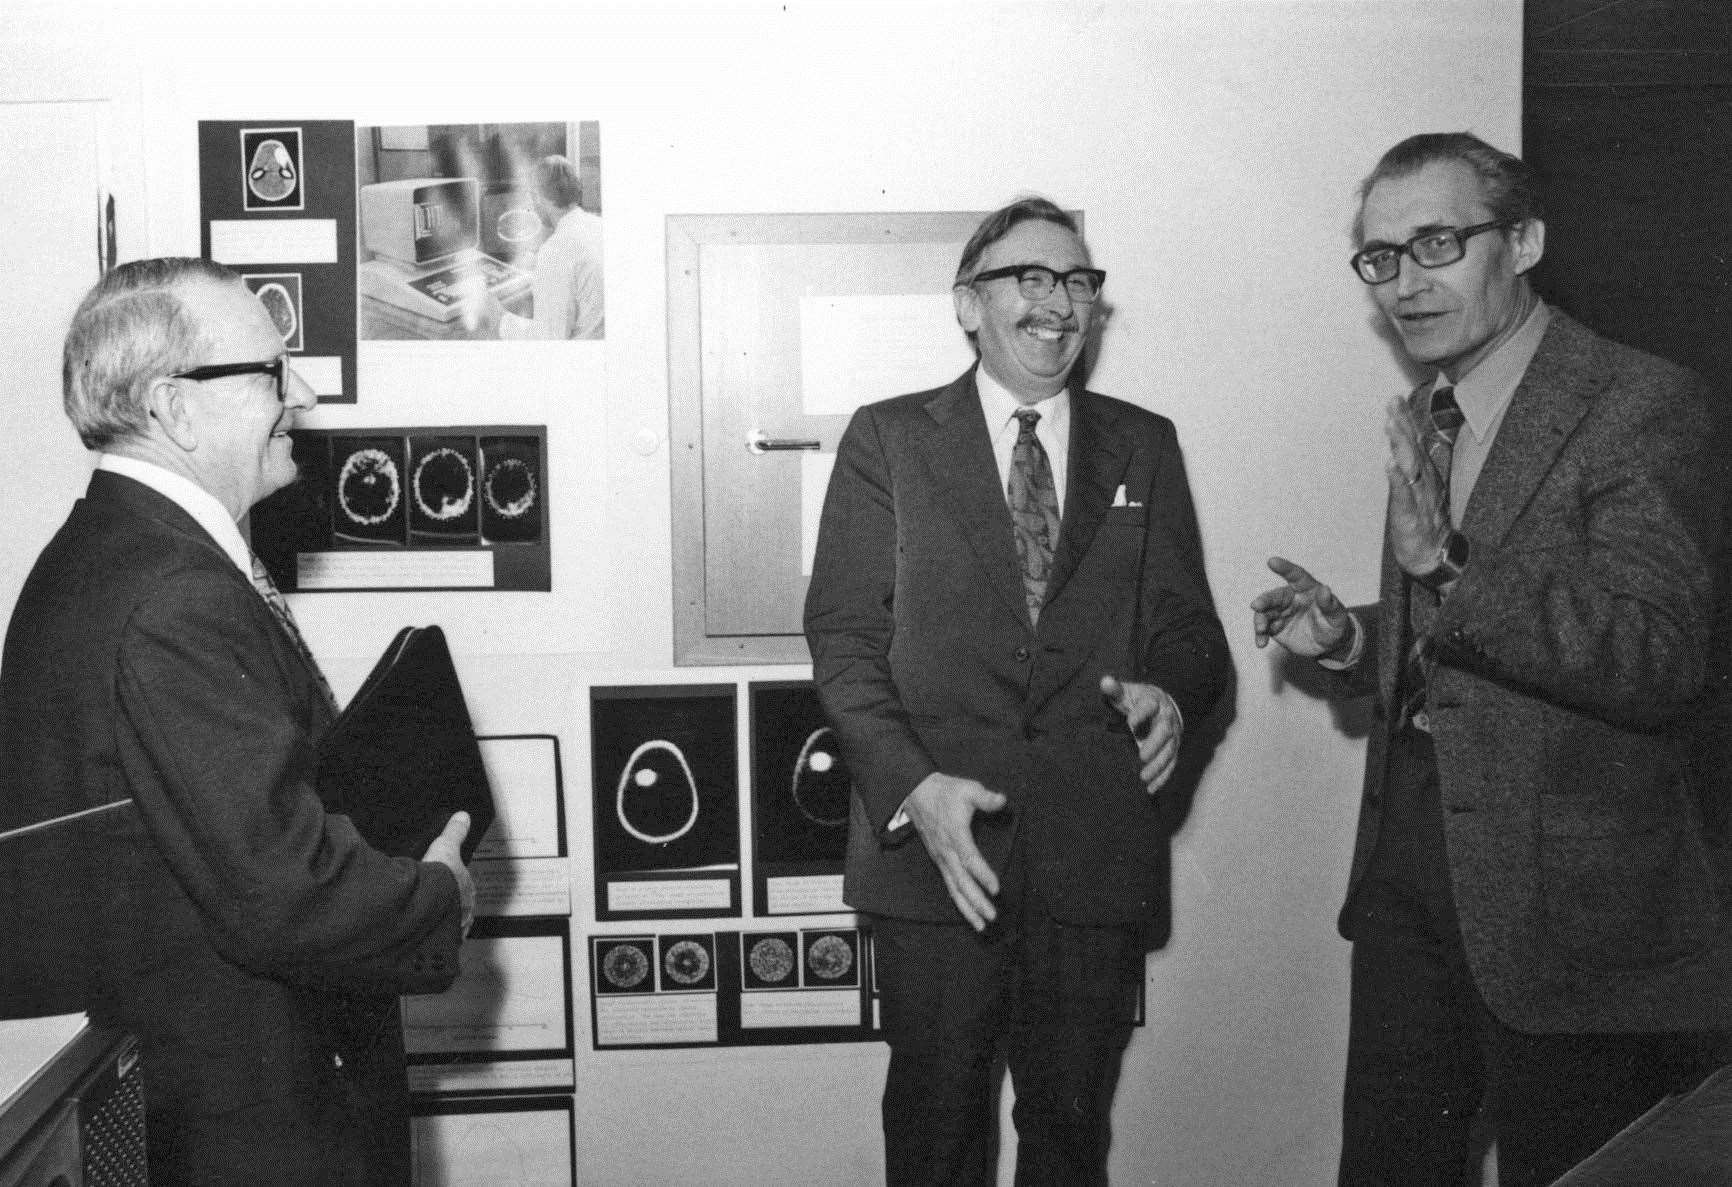 Allan MacLeod Cormack (left) and Godfrey Hounsfield with Professor Torgny Greitz (right), of the Karolinska Medico-Chirurgical Institute, in December 1979. Professor Kit Vaughan says it is the only photograph, as far as he is aware, that was ever taken of Cormack and Hounsfield and it was given to him by Prof Greitz. Picture: Torgny Greitz